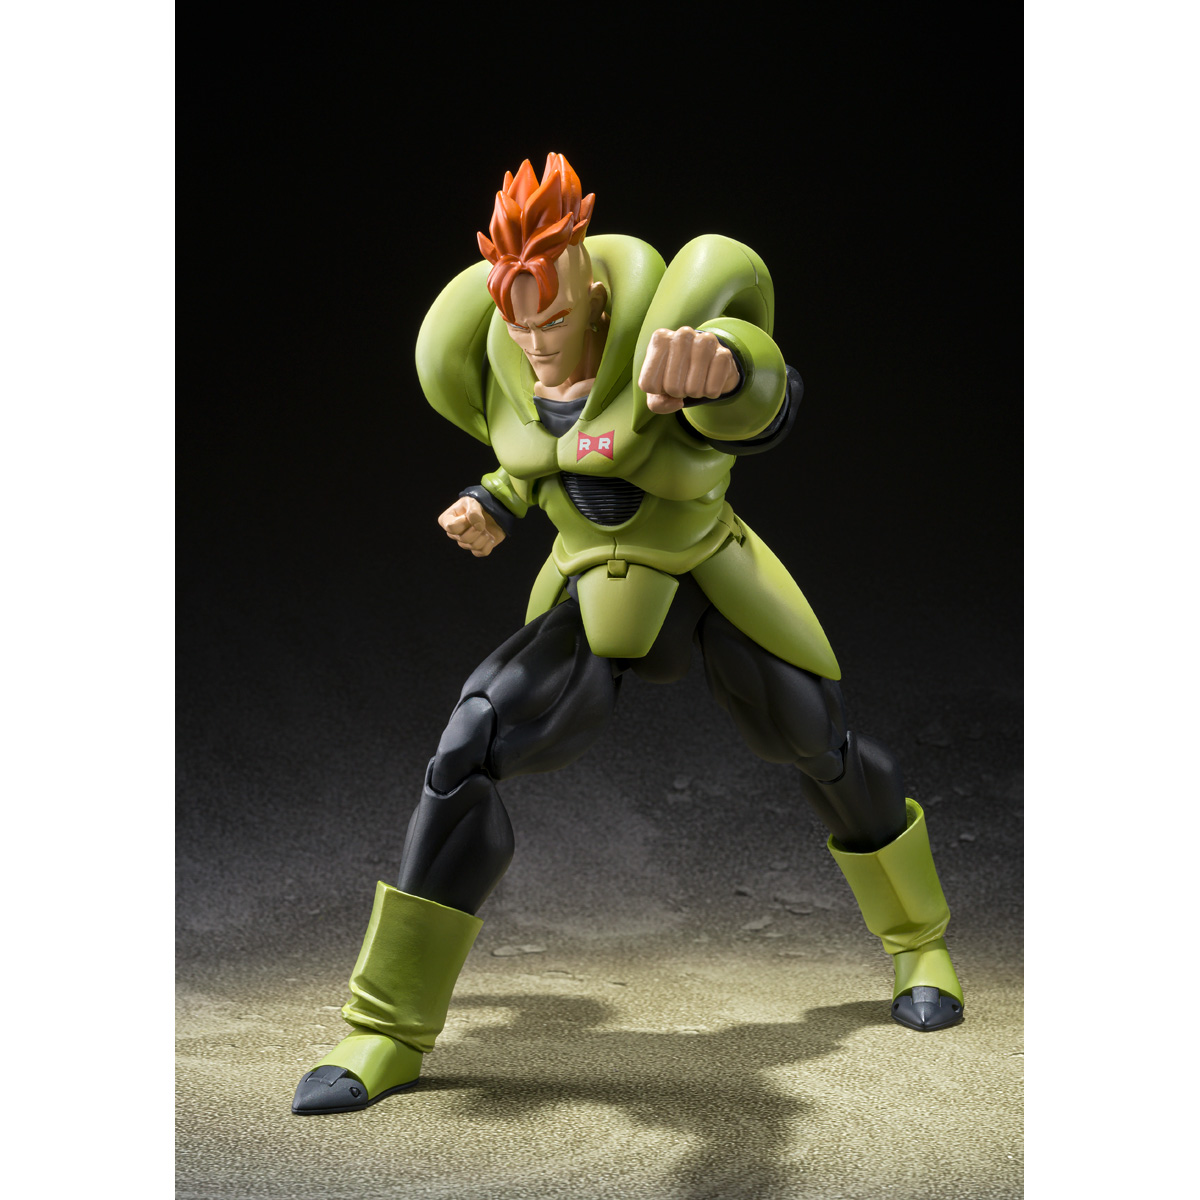 Bandai S.H Figuarts Android 16 Dragon Ball Z Action Figure for sale online 